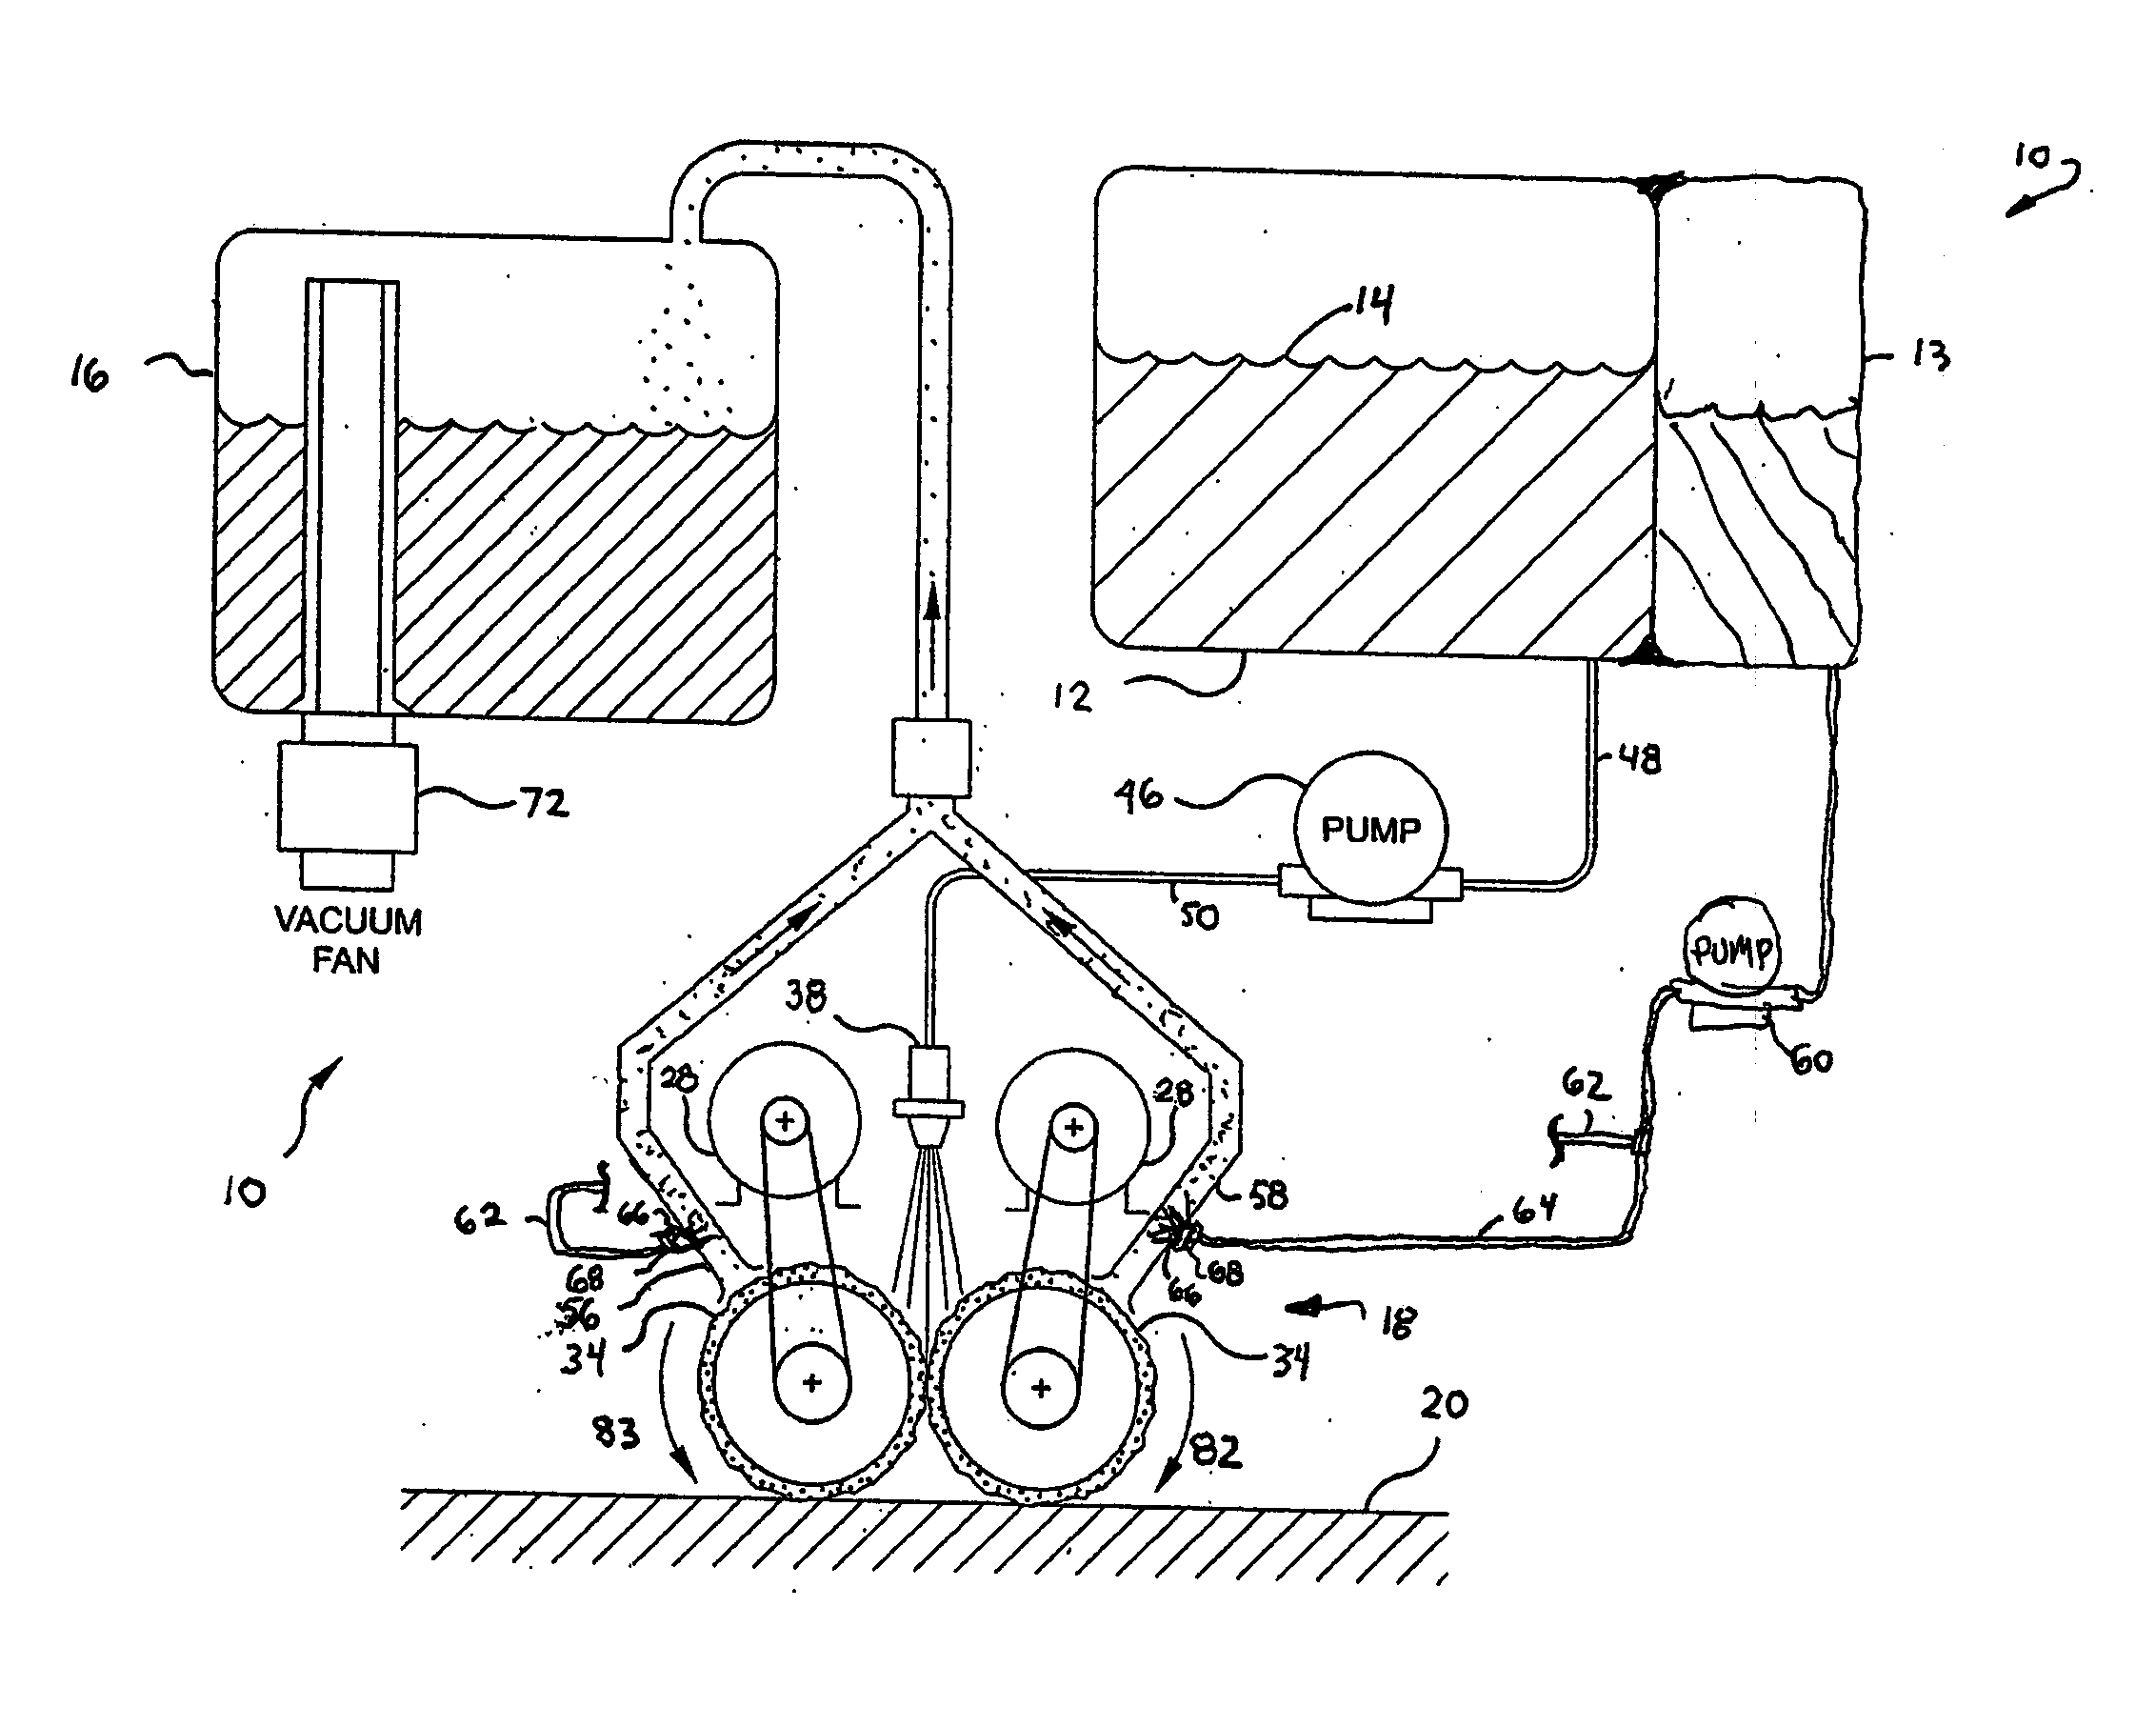 Secondary introduction of fluid into vacuum system